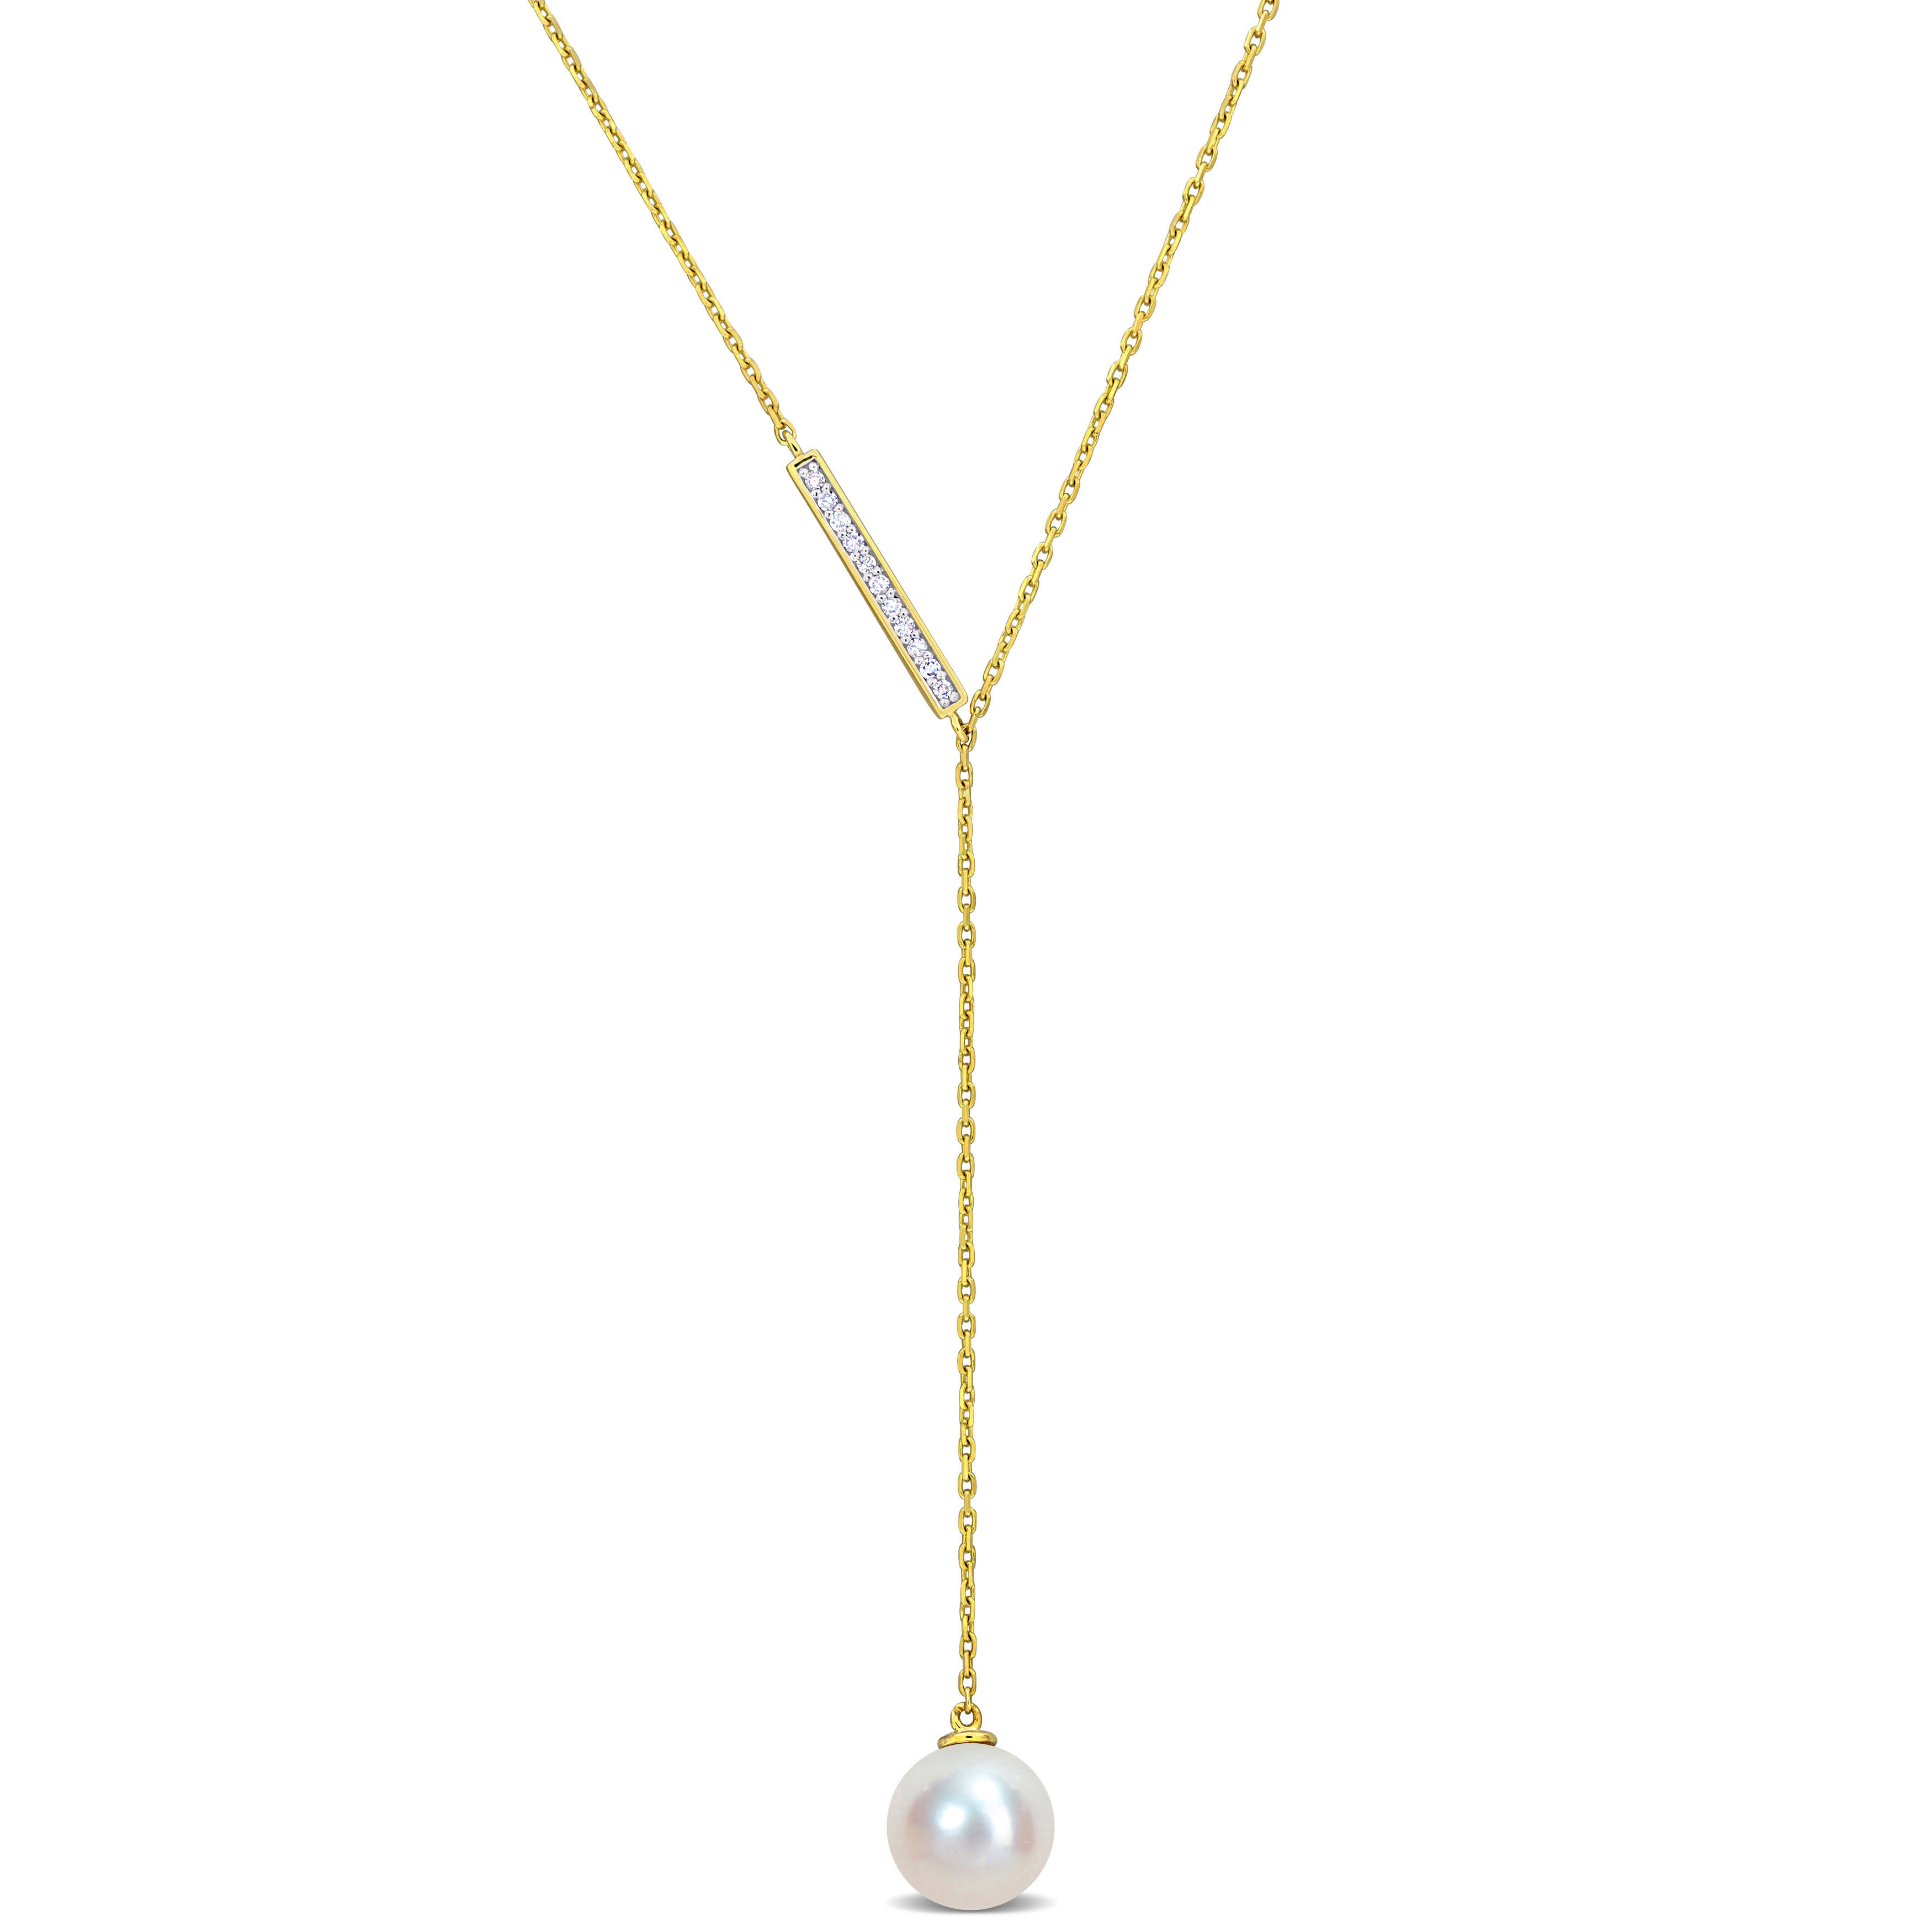 8-8.5 MM Cultured Freshwater Pearl and Diamond Accent Lariant Necklace in 10k Yellow Gold - 17 in.